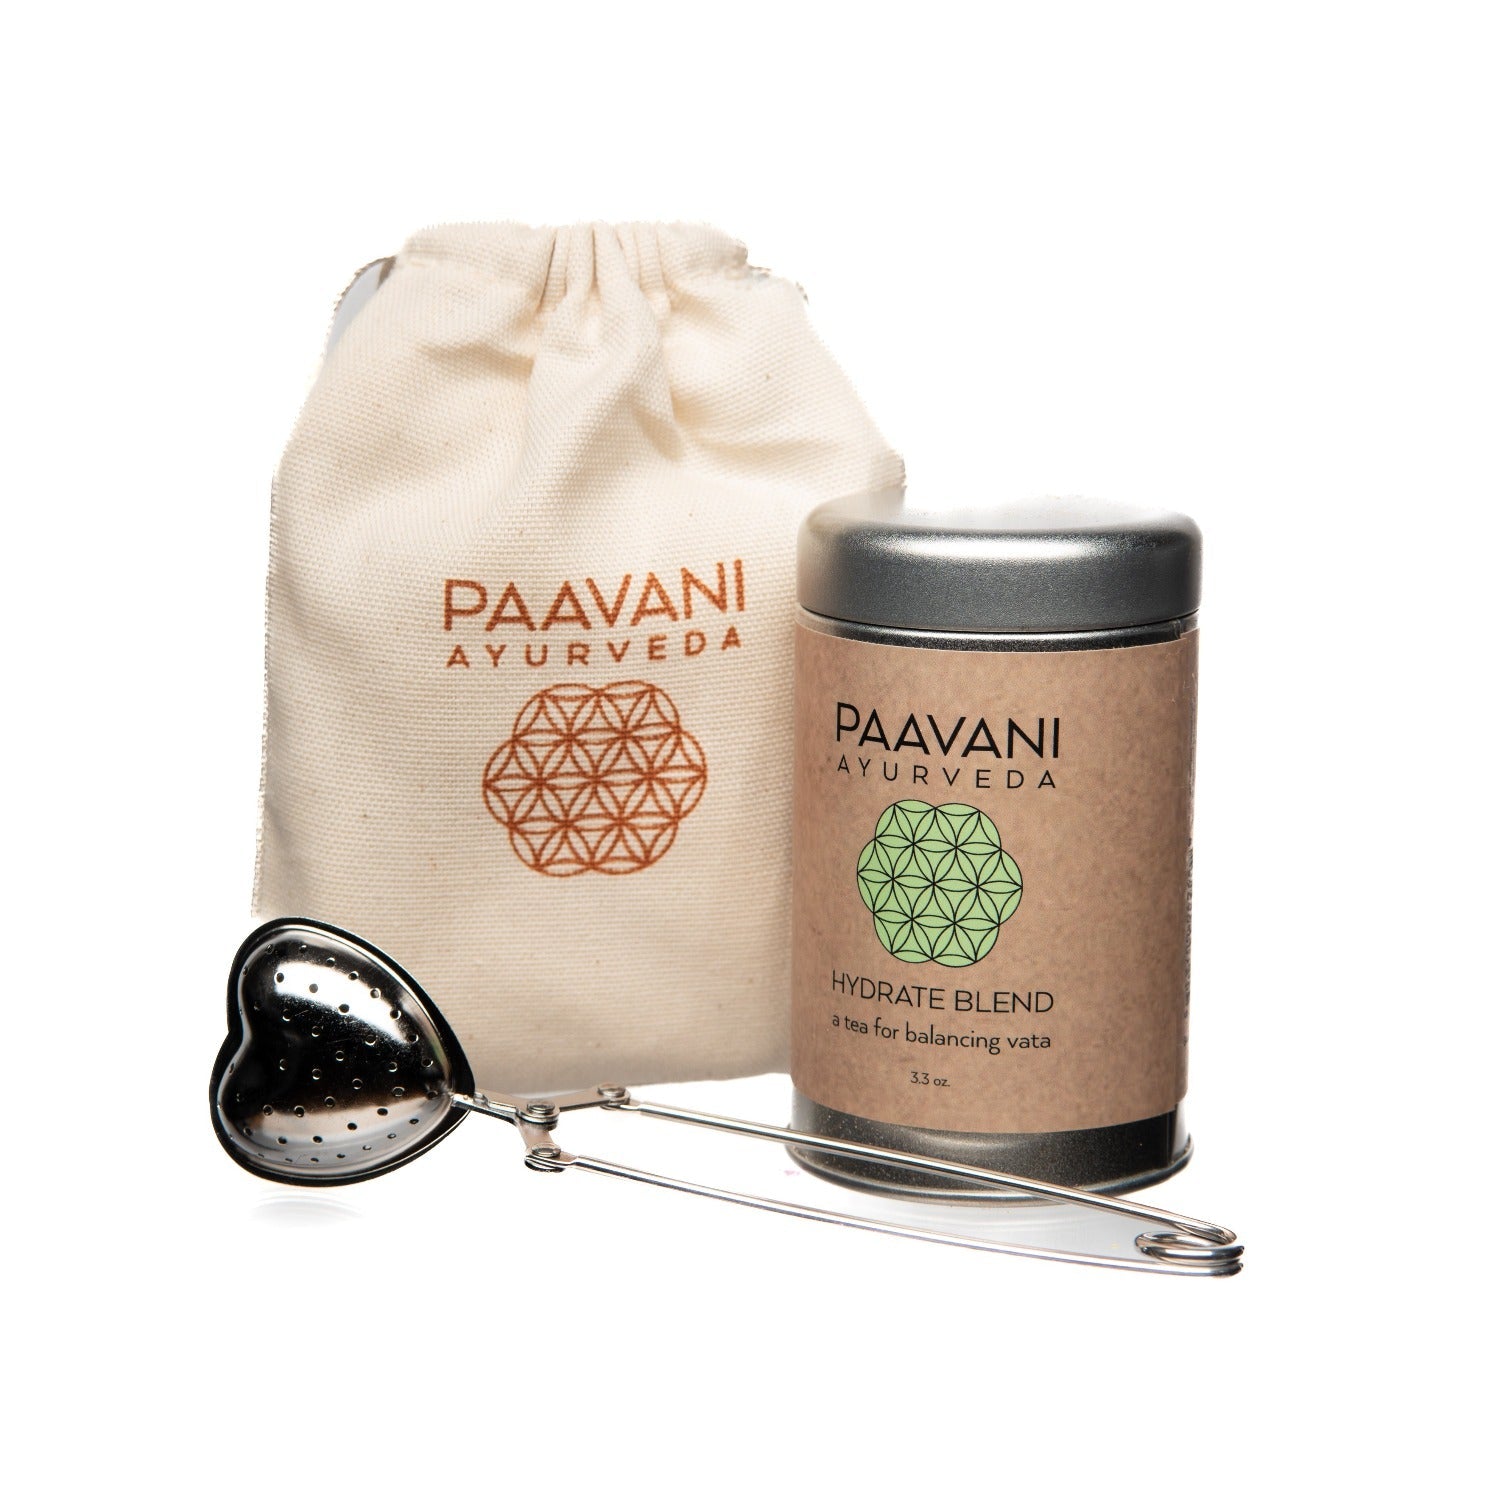 Unwind & discover Ayurveda! Your Herbal Tea Ritual Kit - 5 organic blends, infuser, travel pouch. Stress relief, self-care, hormone balance, caffeine-free. Shop now!